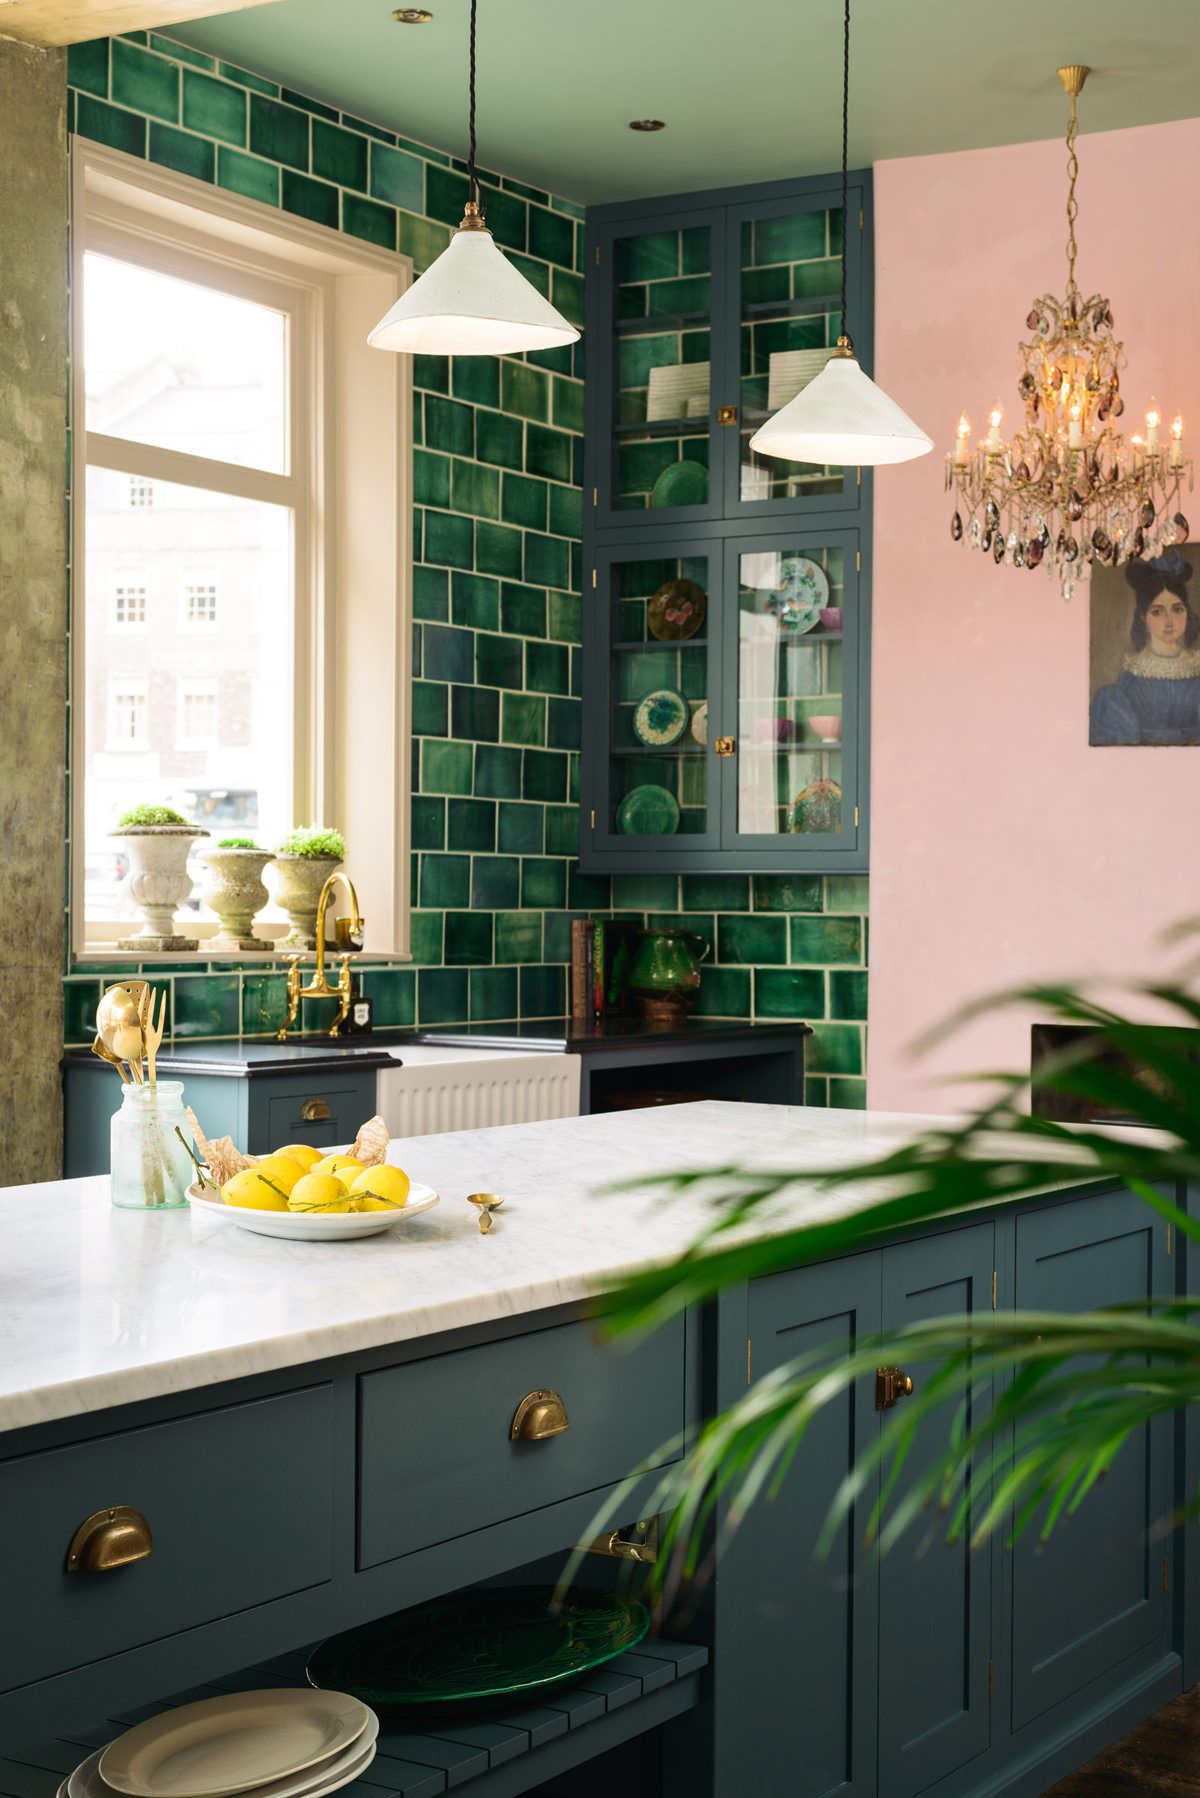 20 Green Kitchen Ideas To Add Fresh Color To Your Cooking Space